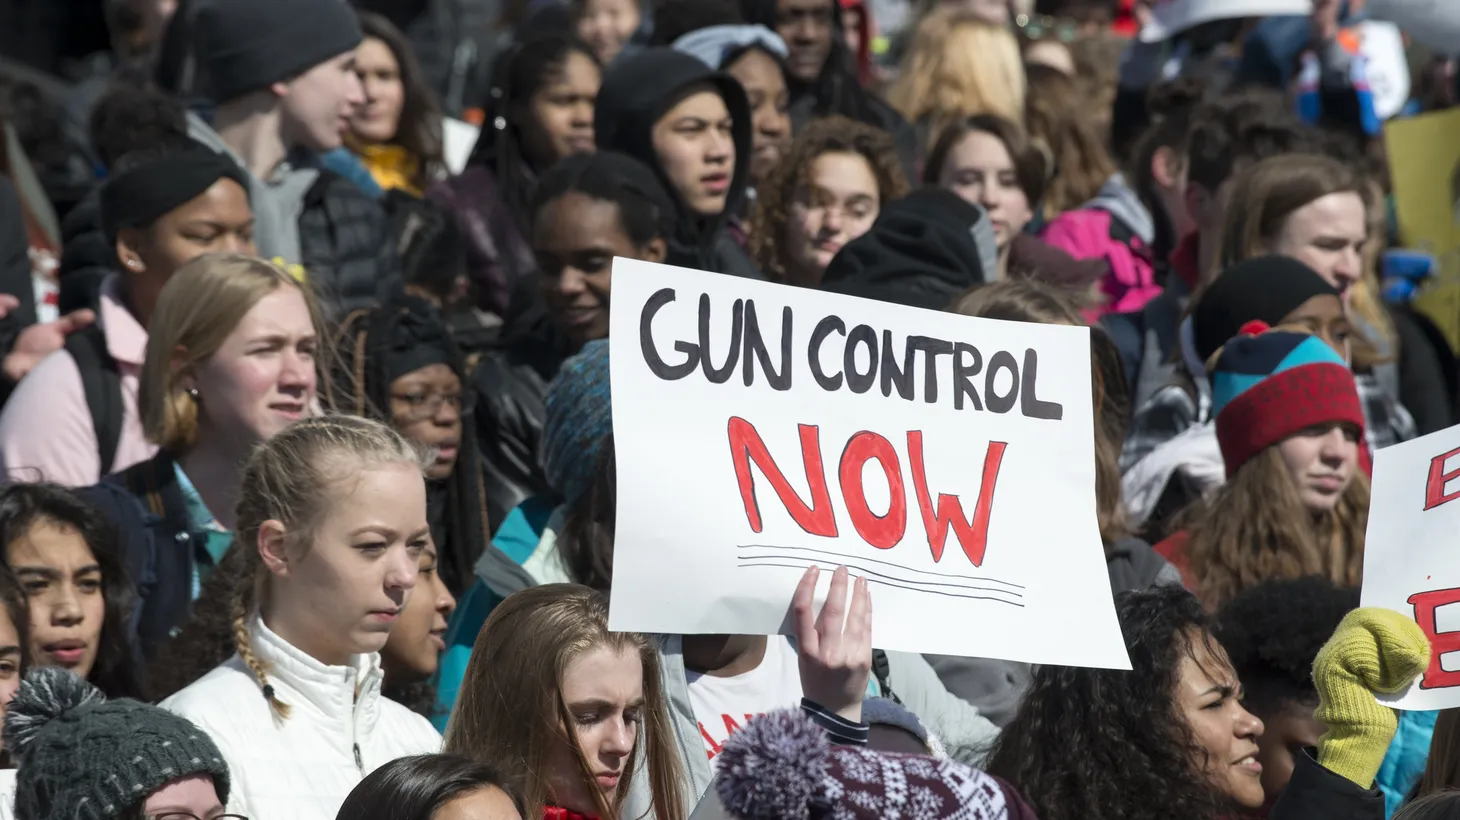 Around 4000 high school students walked out of school and marched to the Minnesota capitol to demand that legislators make changes to gun control laws, 2018.